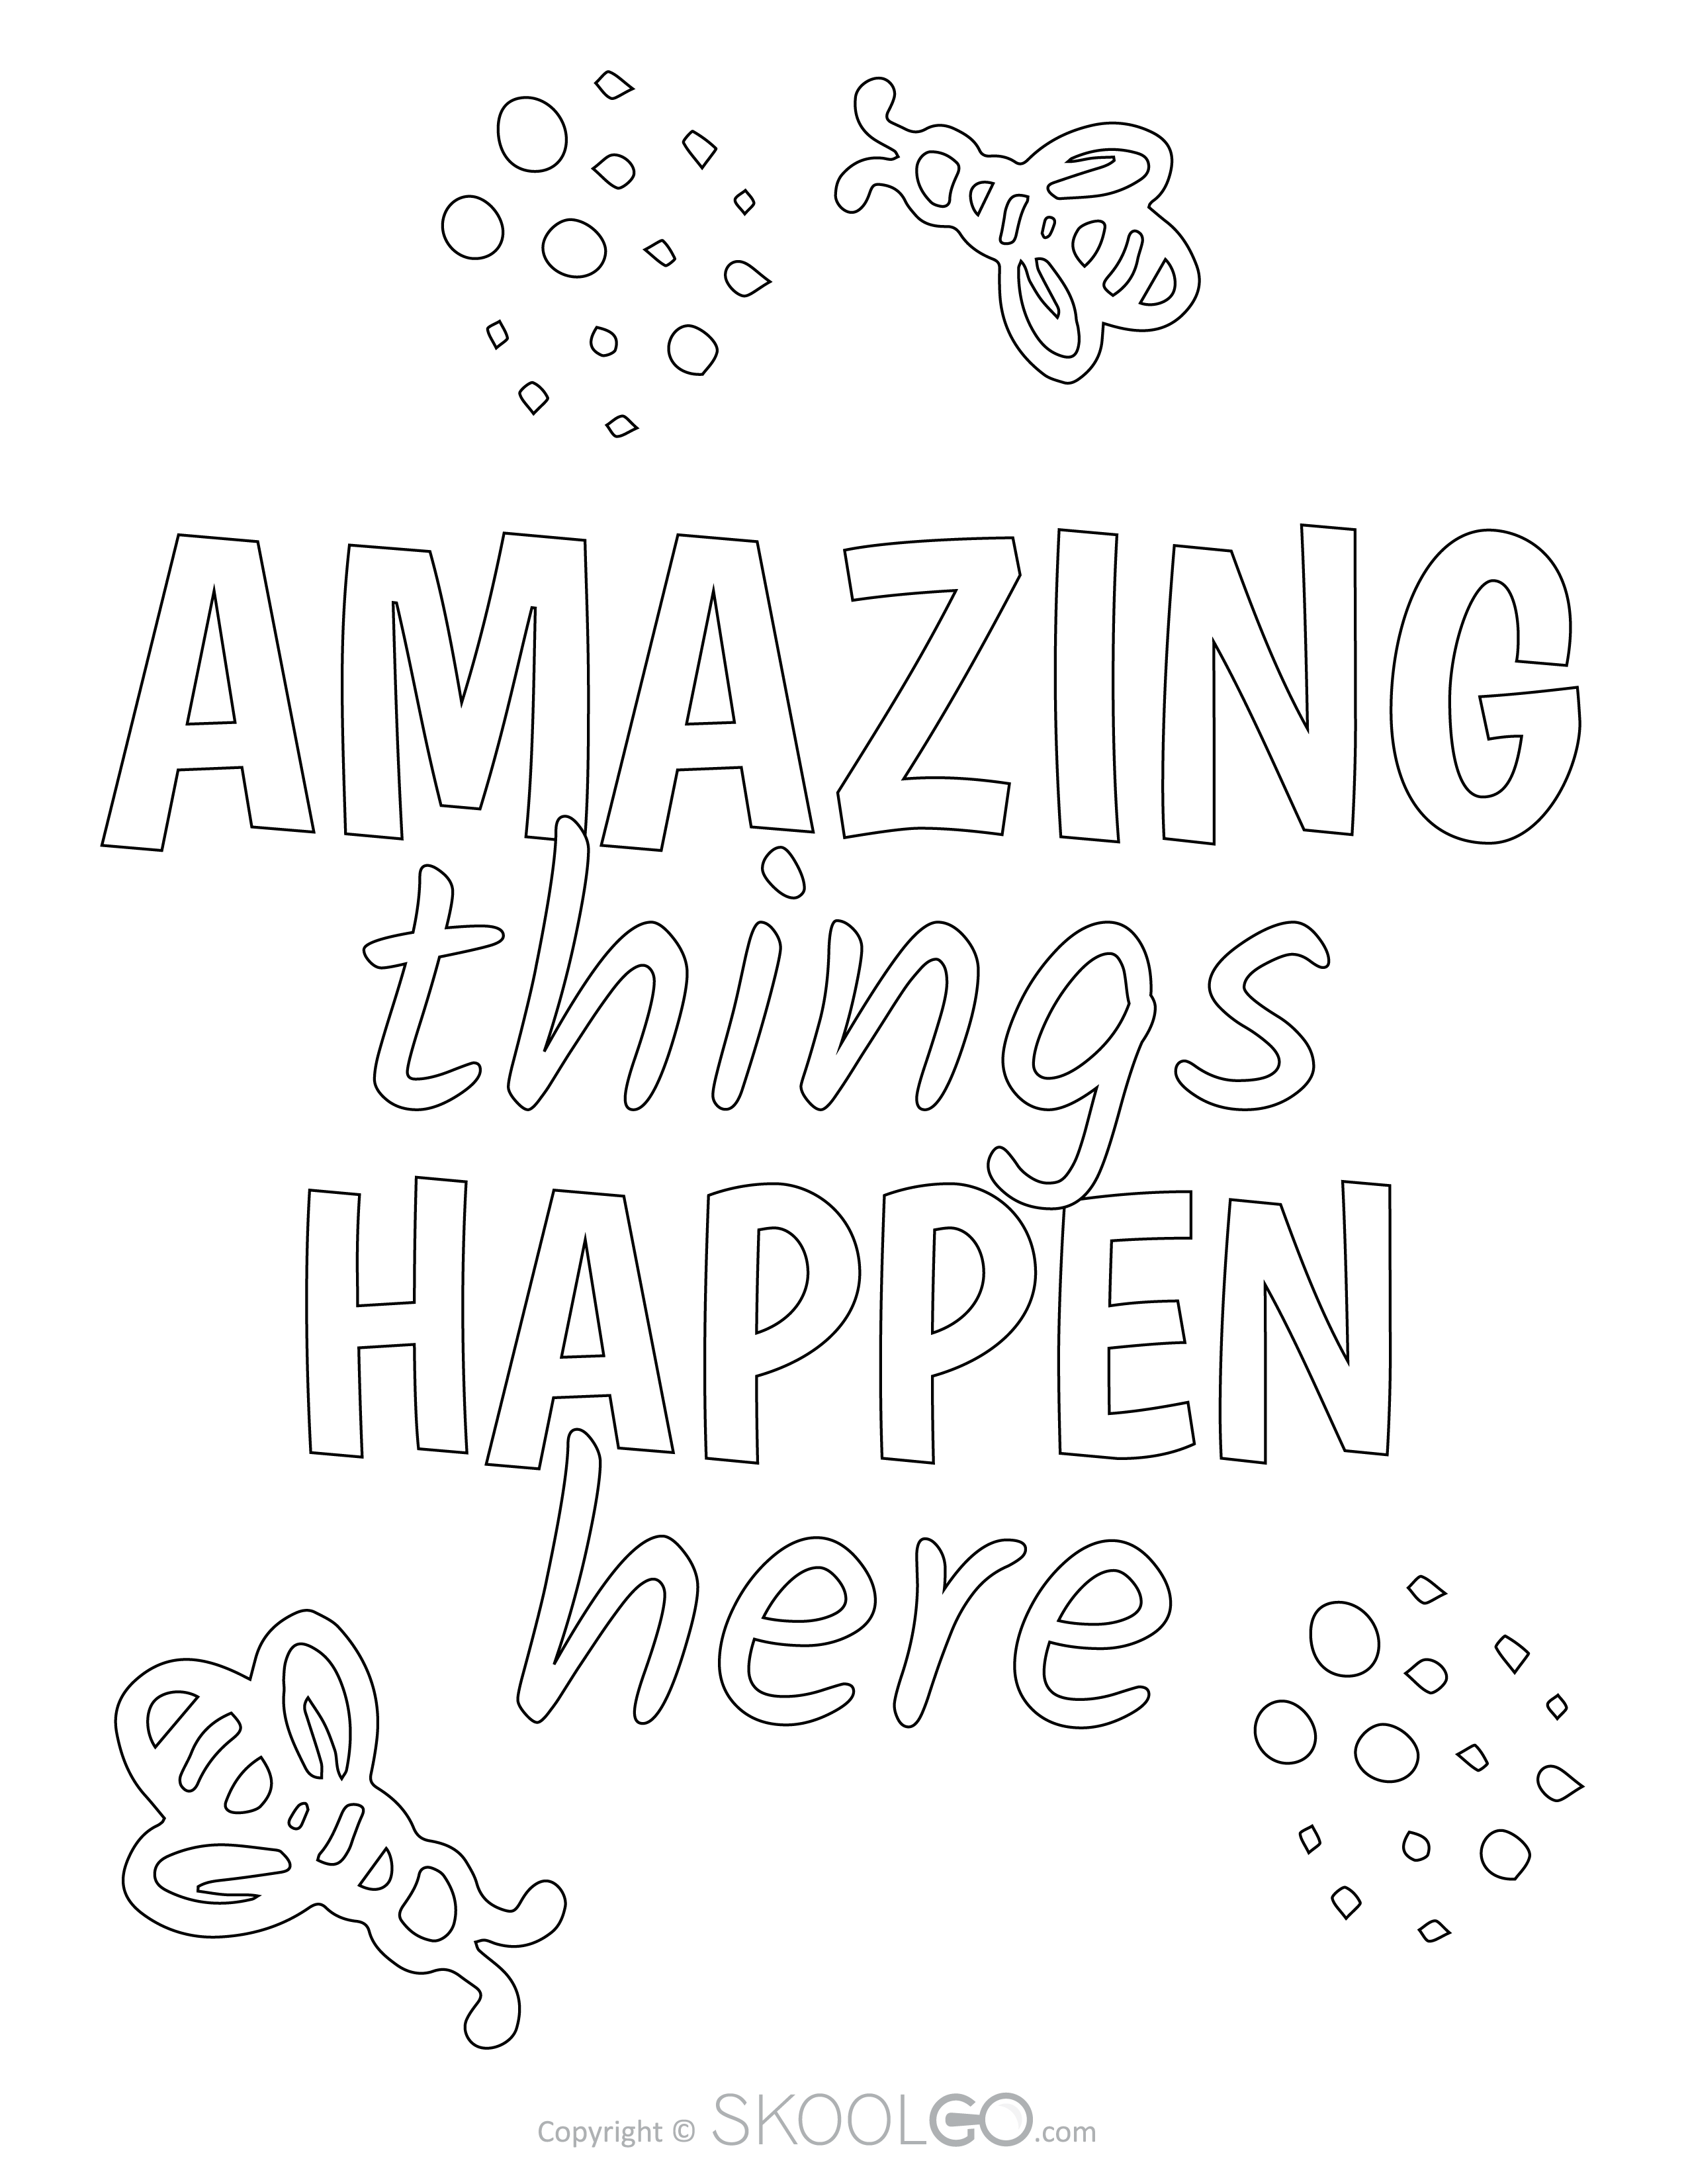 Amazing Things Happen Here - Free Coloring Version Poster